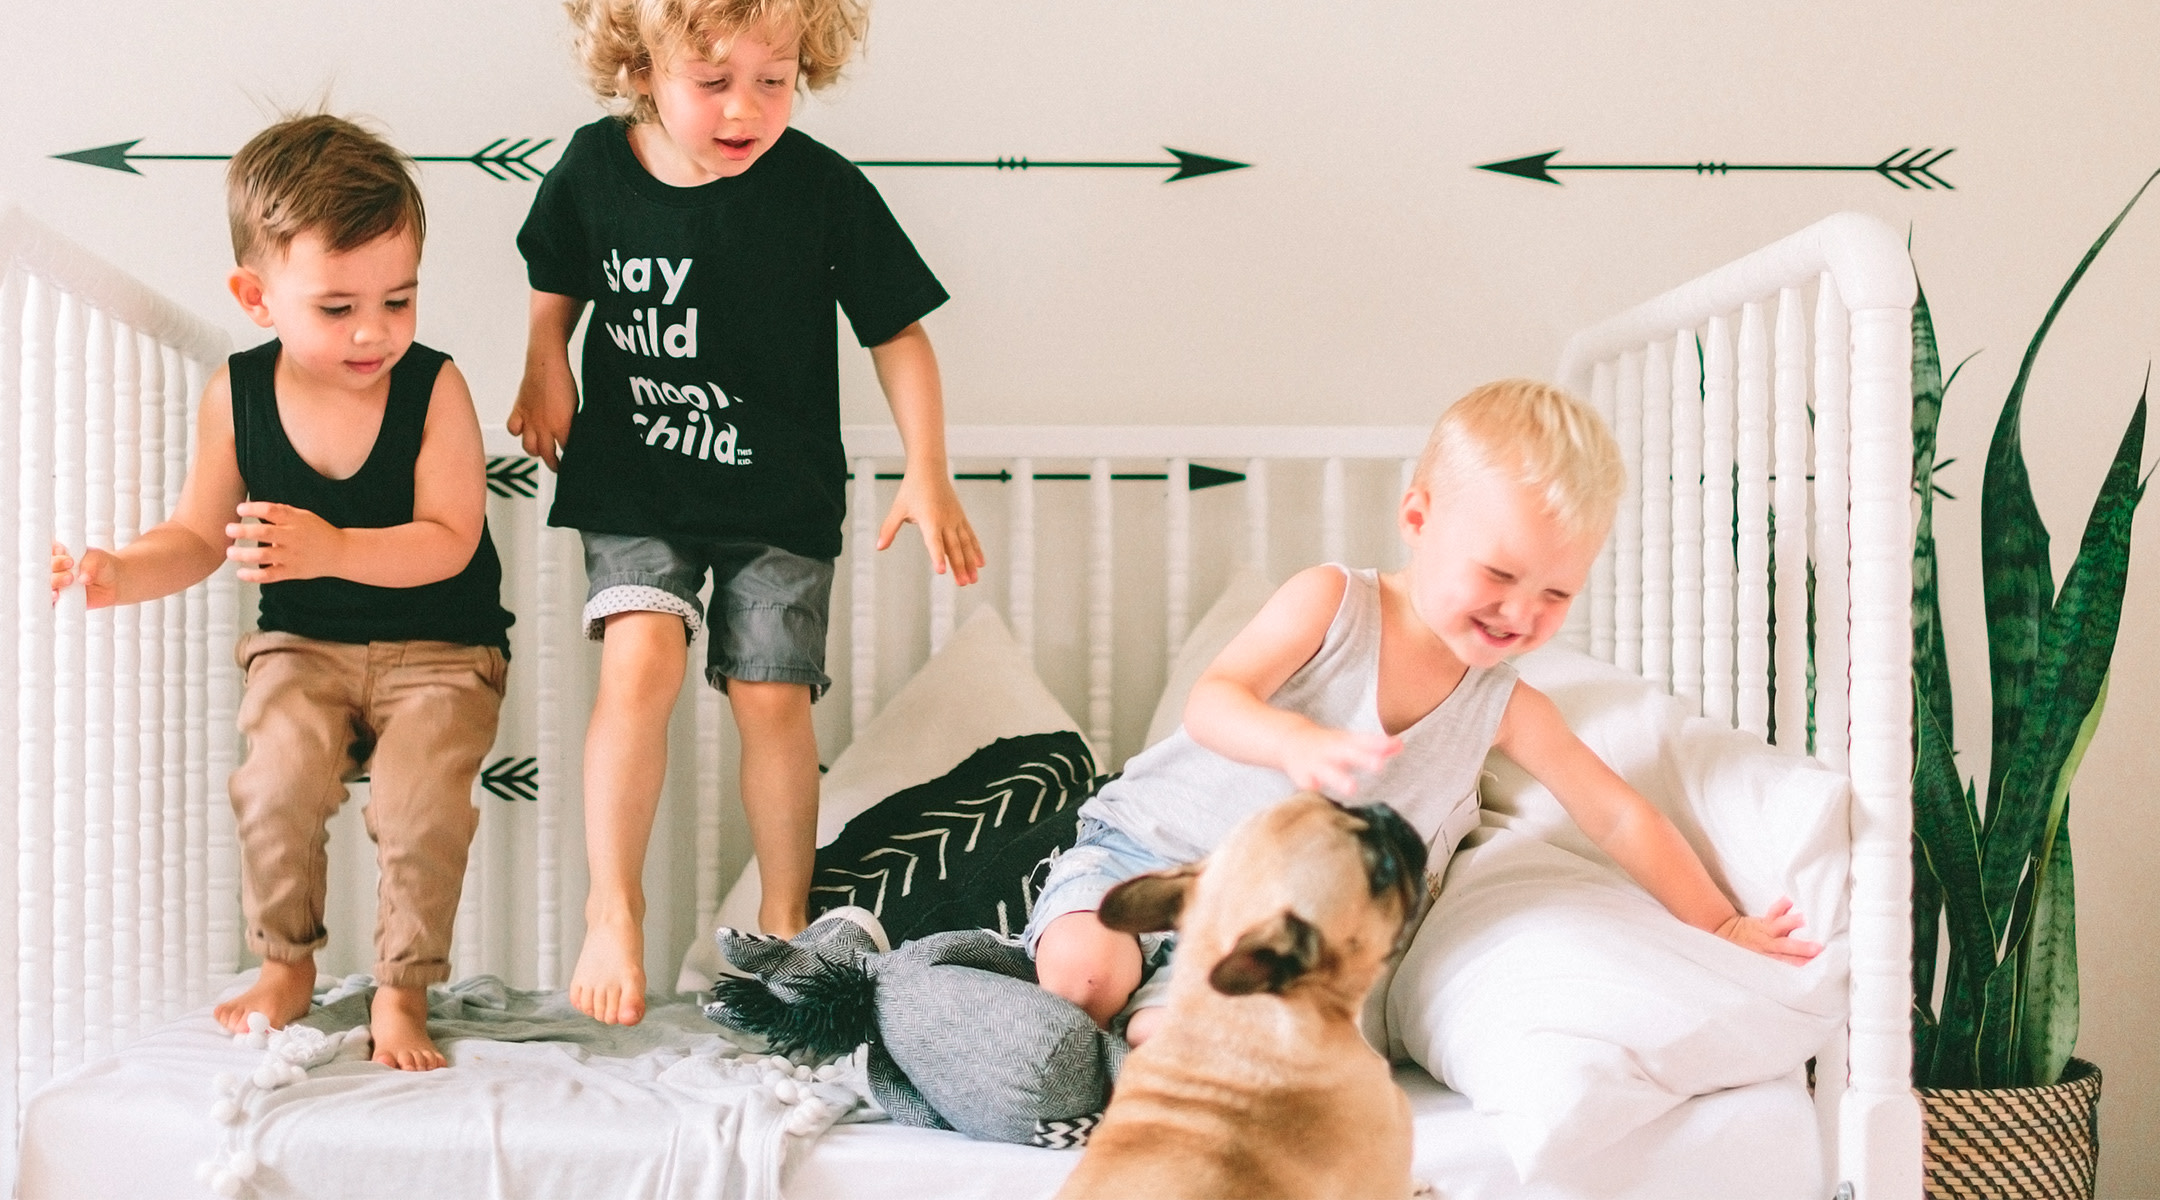 three little boys laughing and jumping on a bed